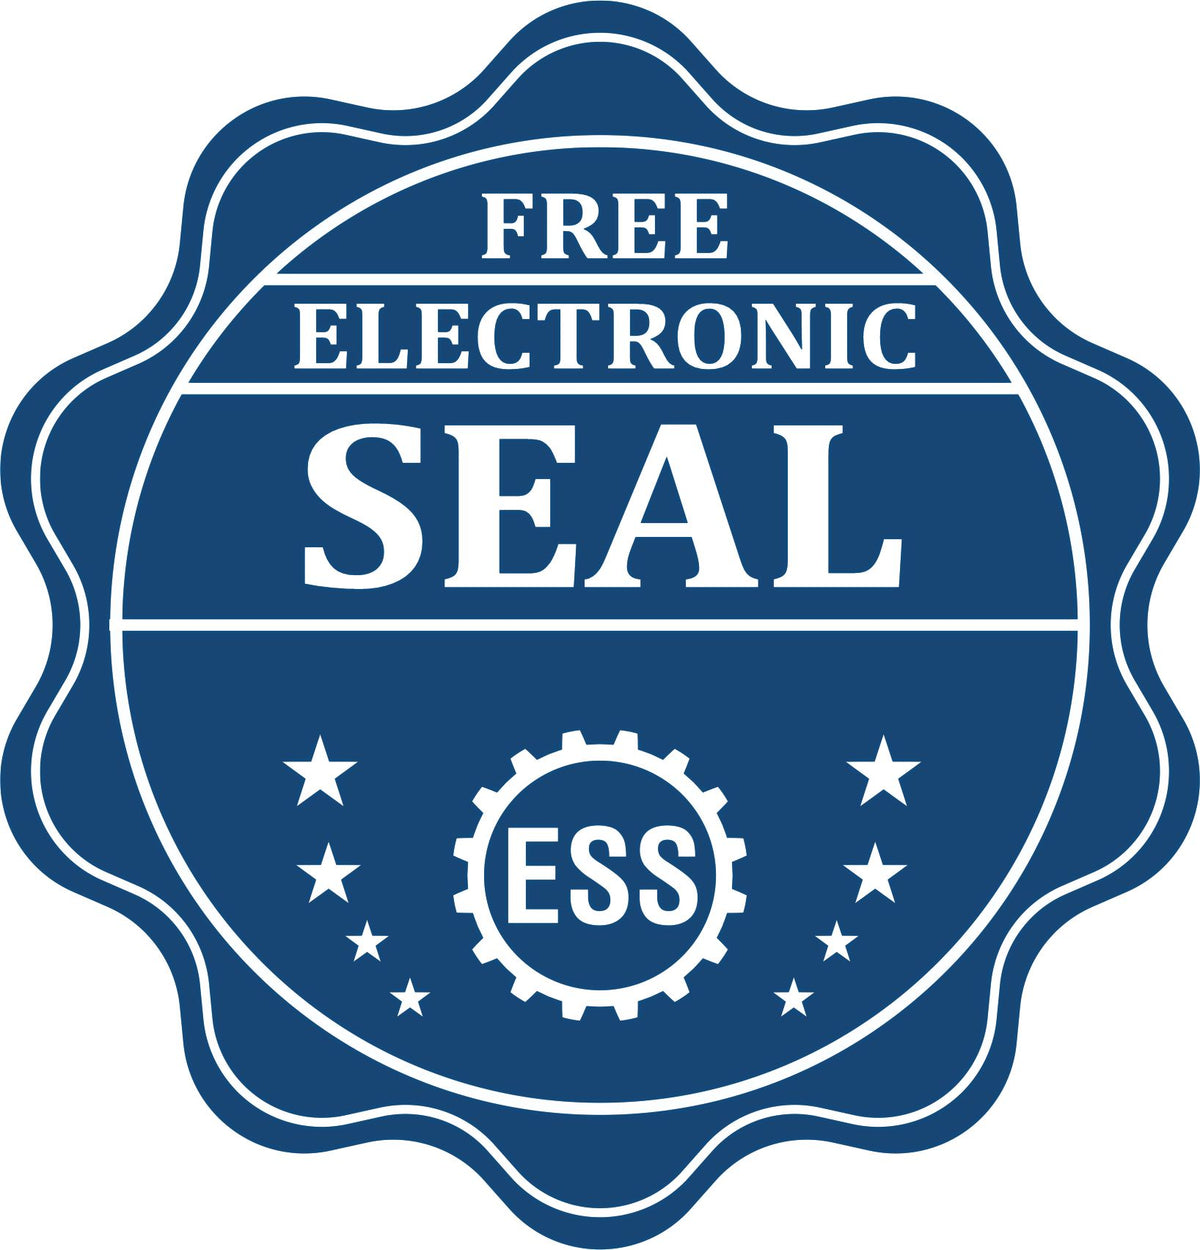 A badge showing a free electronic seal for the PSI Arizona Notary Stamp with stars and the ESS gear on the emblem.